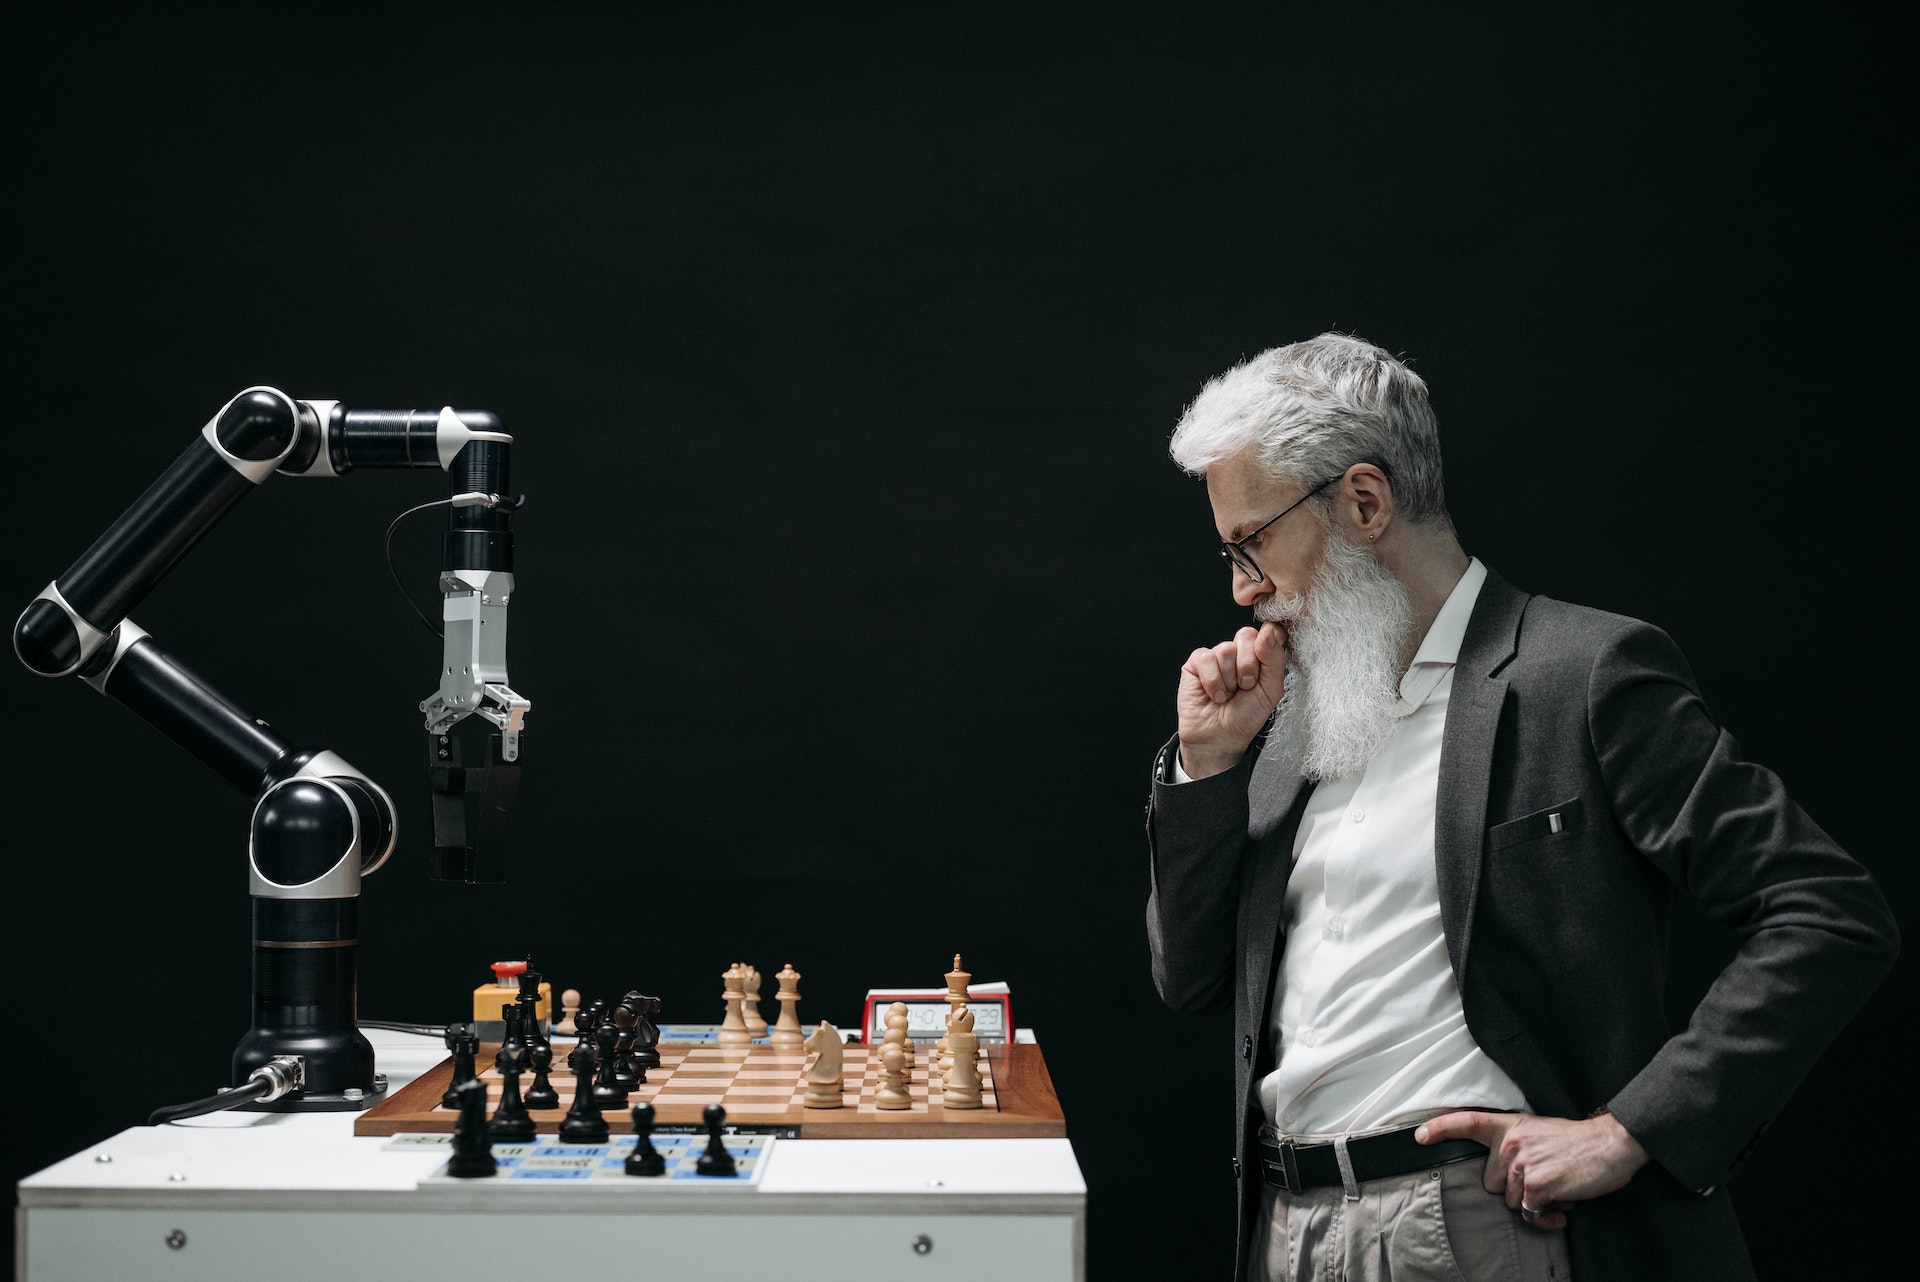 Create stunning presentations with the power of hiCreo and artificial intelligence - man playing chess with robotic arm